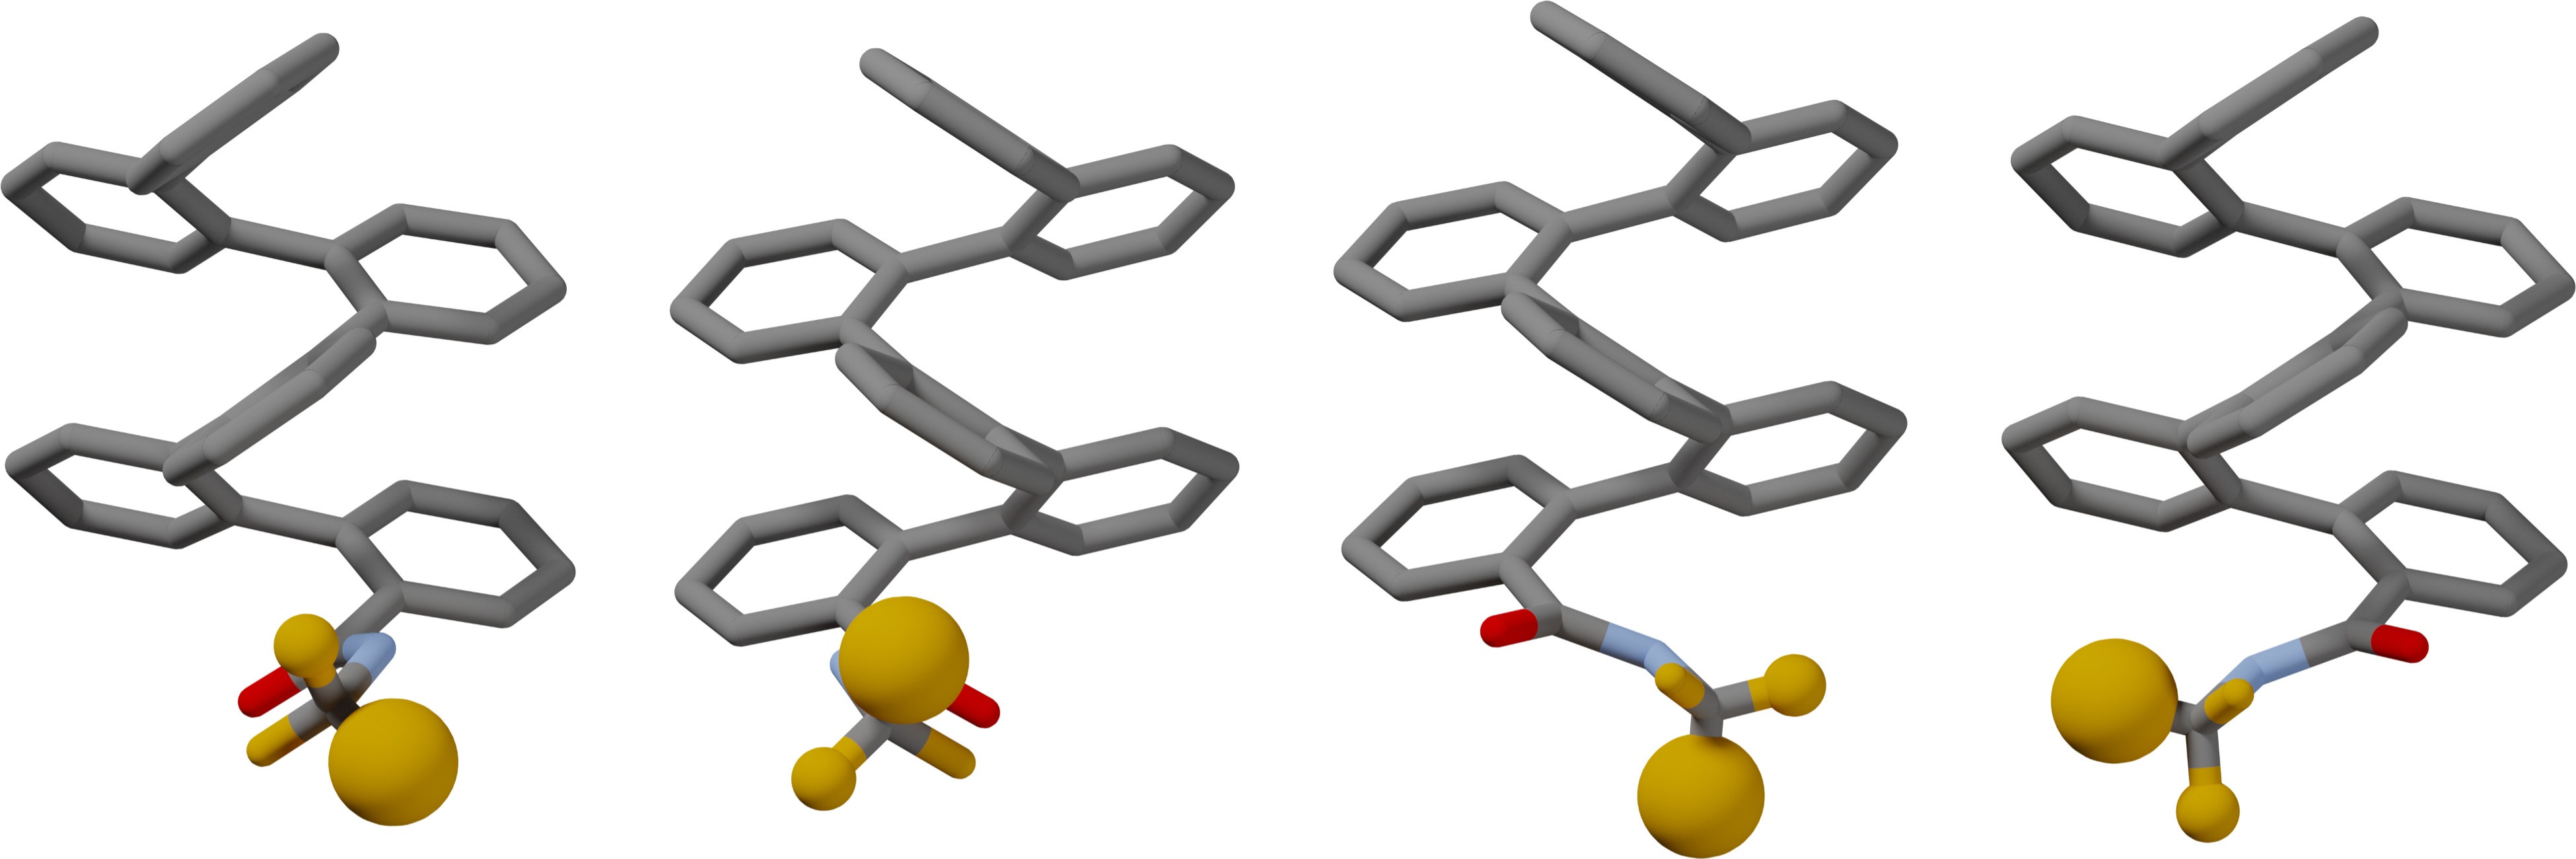 TOC graphic showing four o-phenylene foldamers with different orientations of the terminal groups